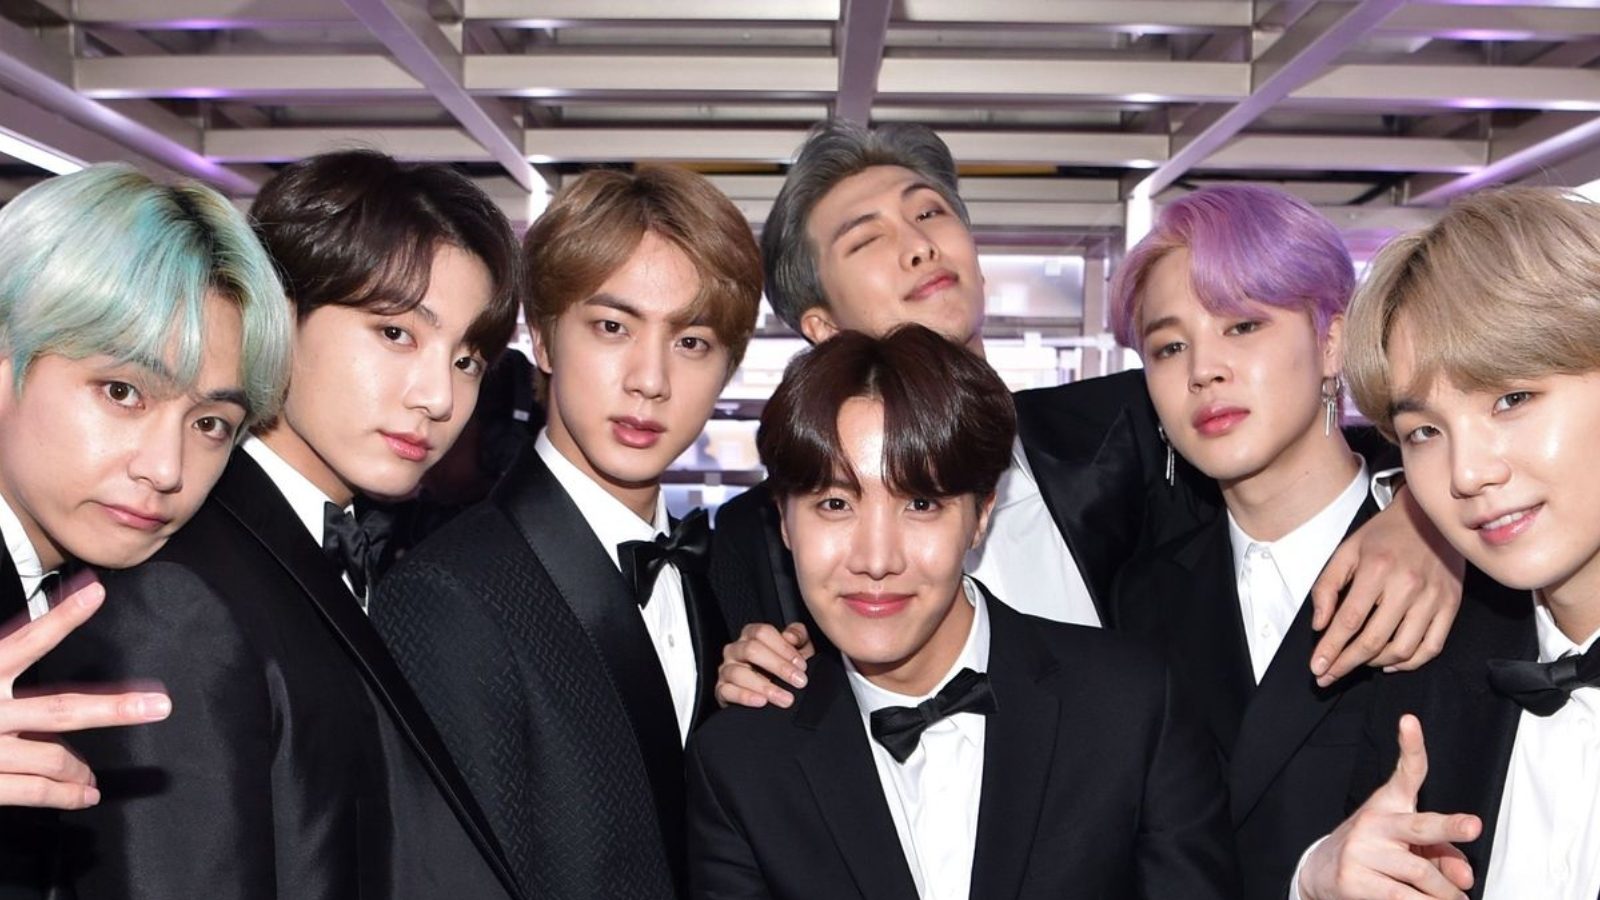 Grammy Awards Why BTS Is Not Attending the Grammys This Year; All You